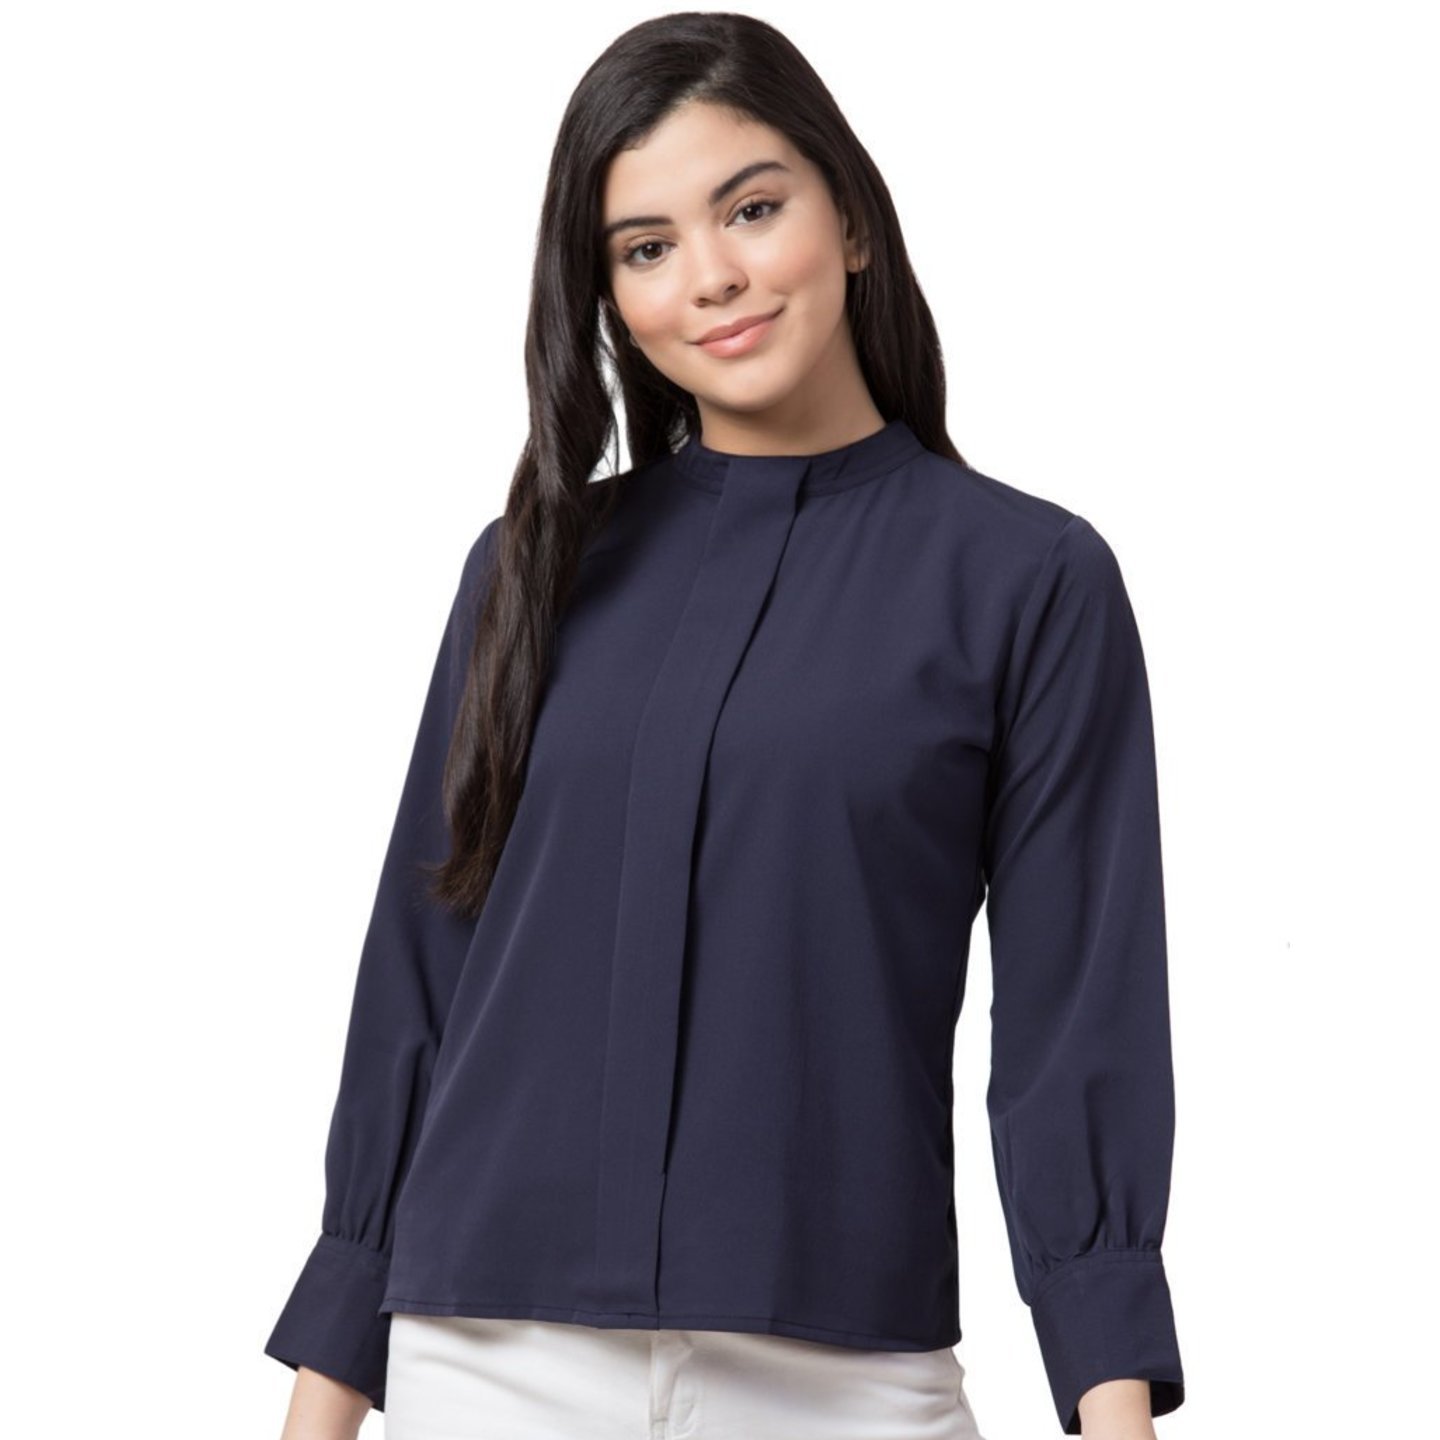 Paretto Navy Blue Full Sleeves Top for Women